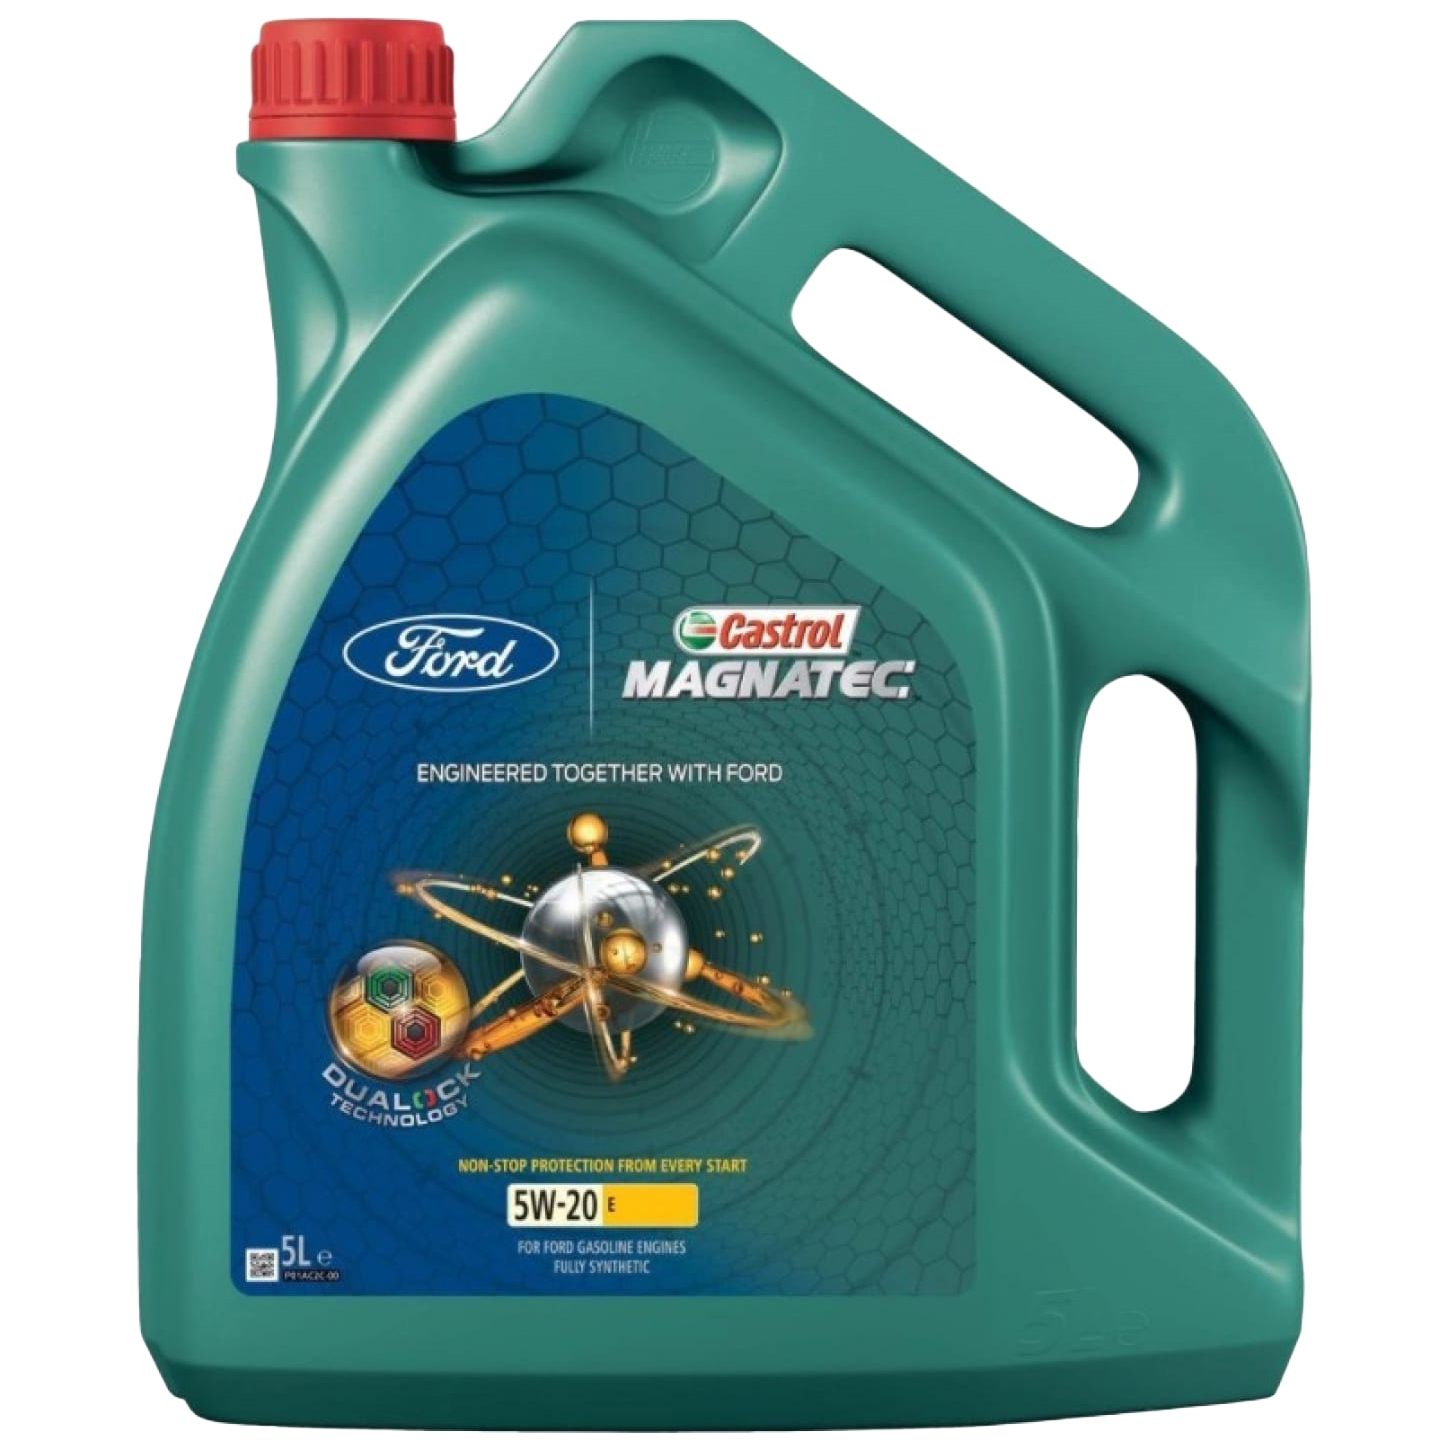 FORD 15D633 15D633_Моторное масло! 5W20 (5L) Ford-Castrol\ WSS-M2C948-B () 1шт